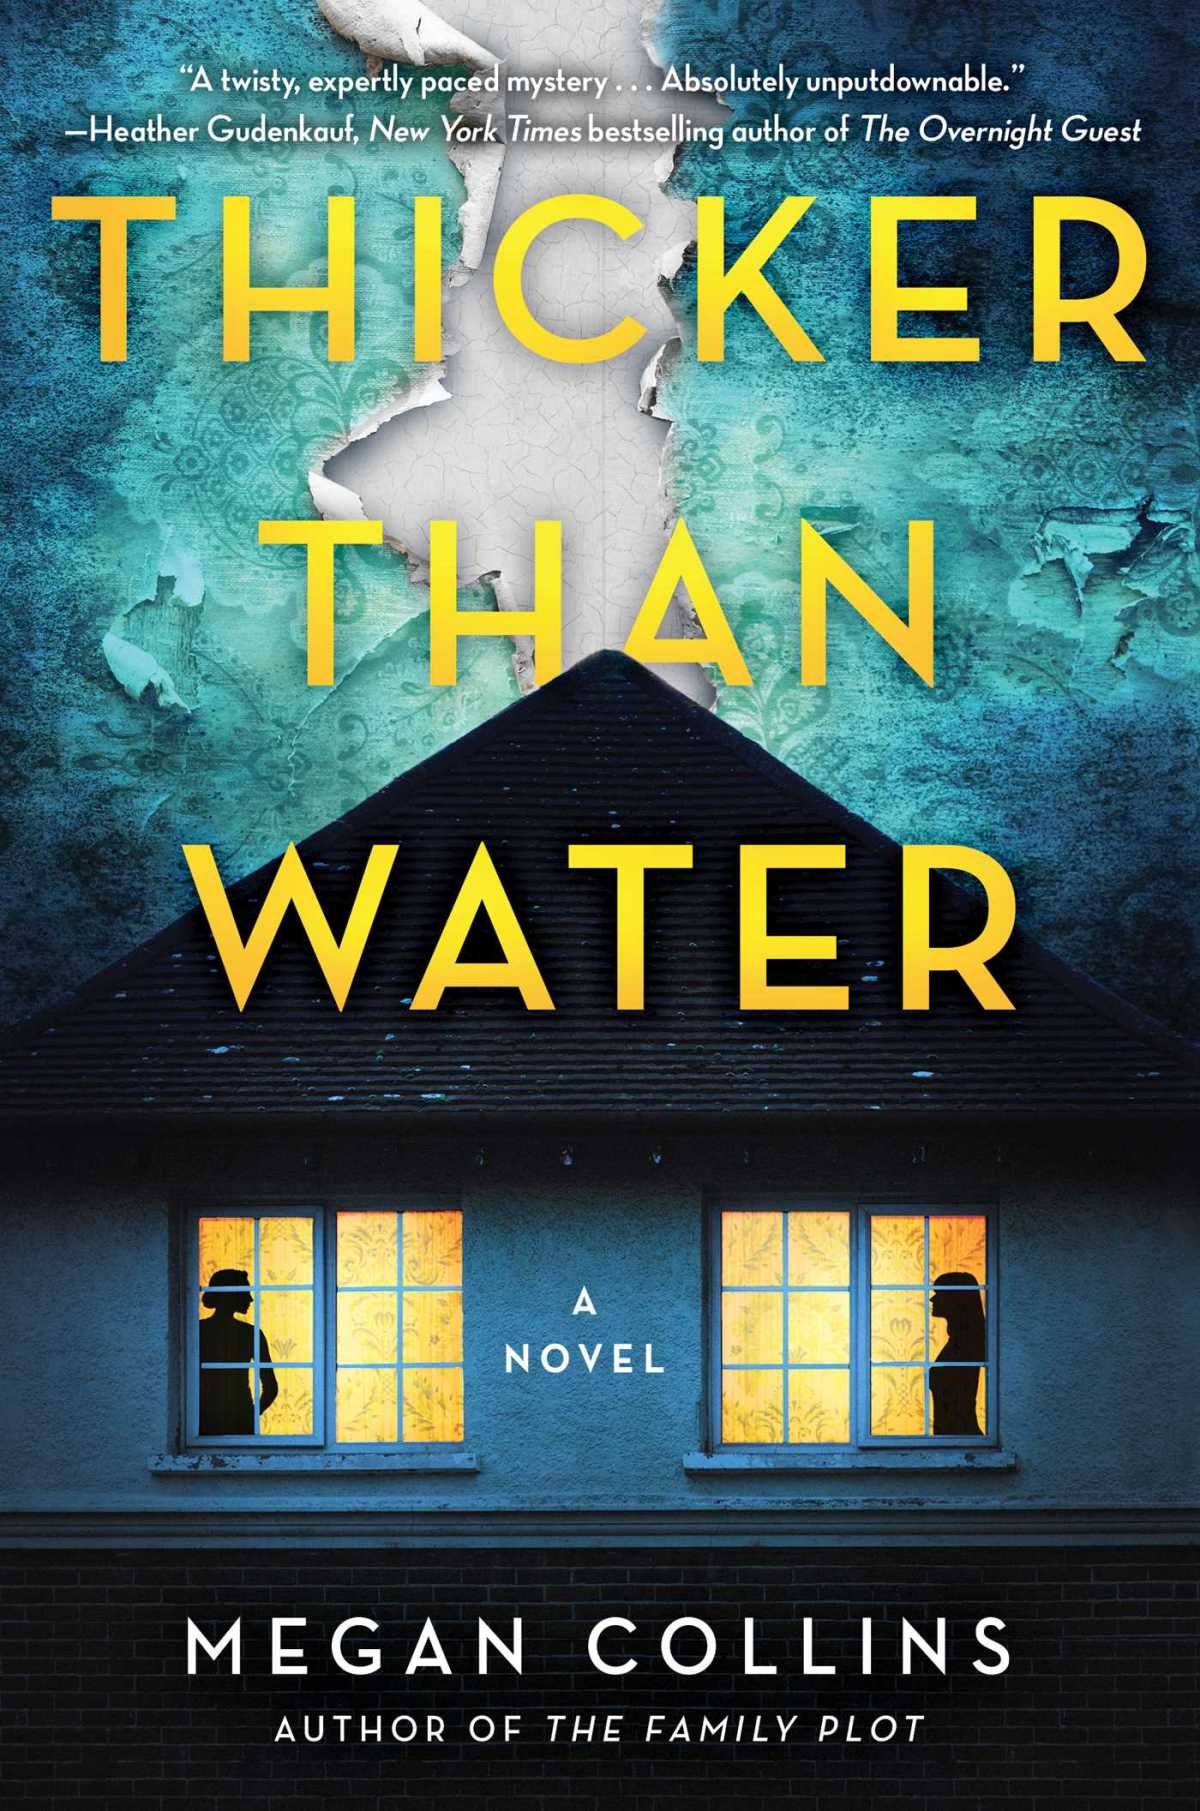 The one I wish I liked better: Thicker Than Water by Megan Collins